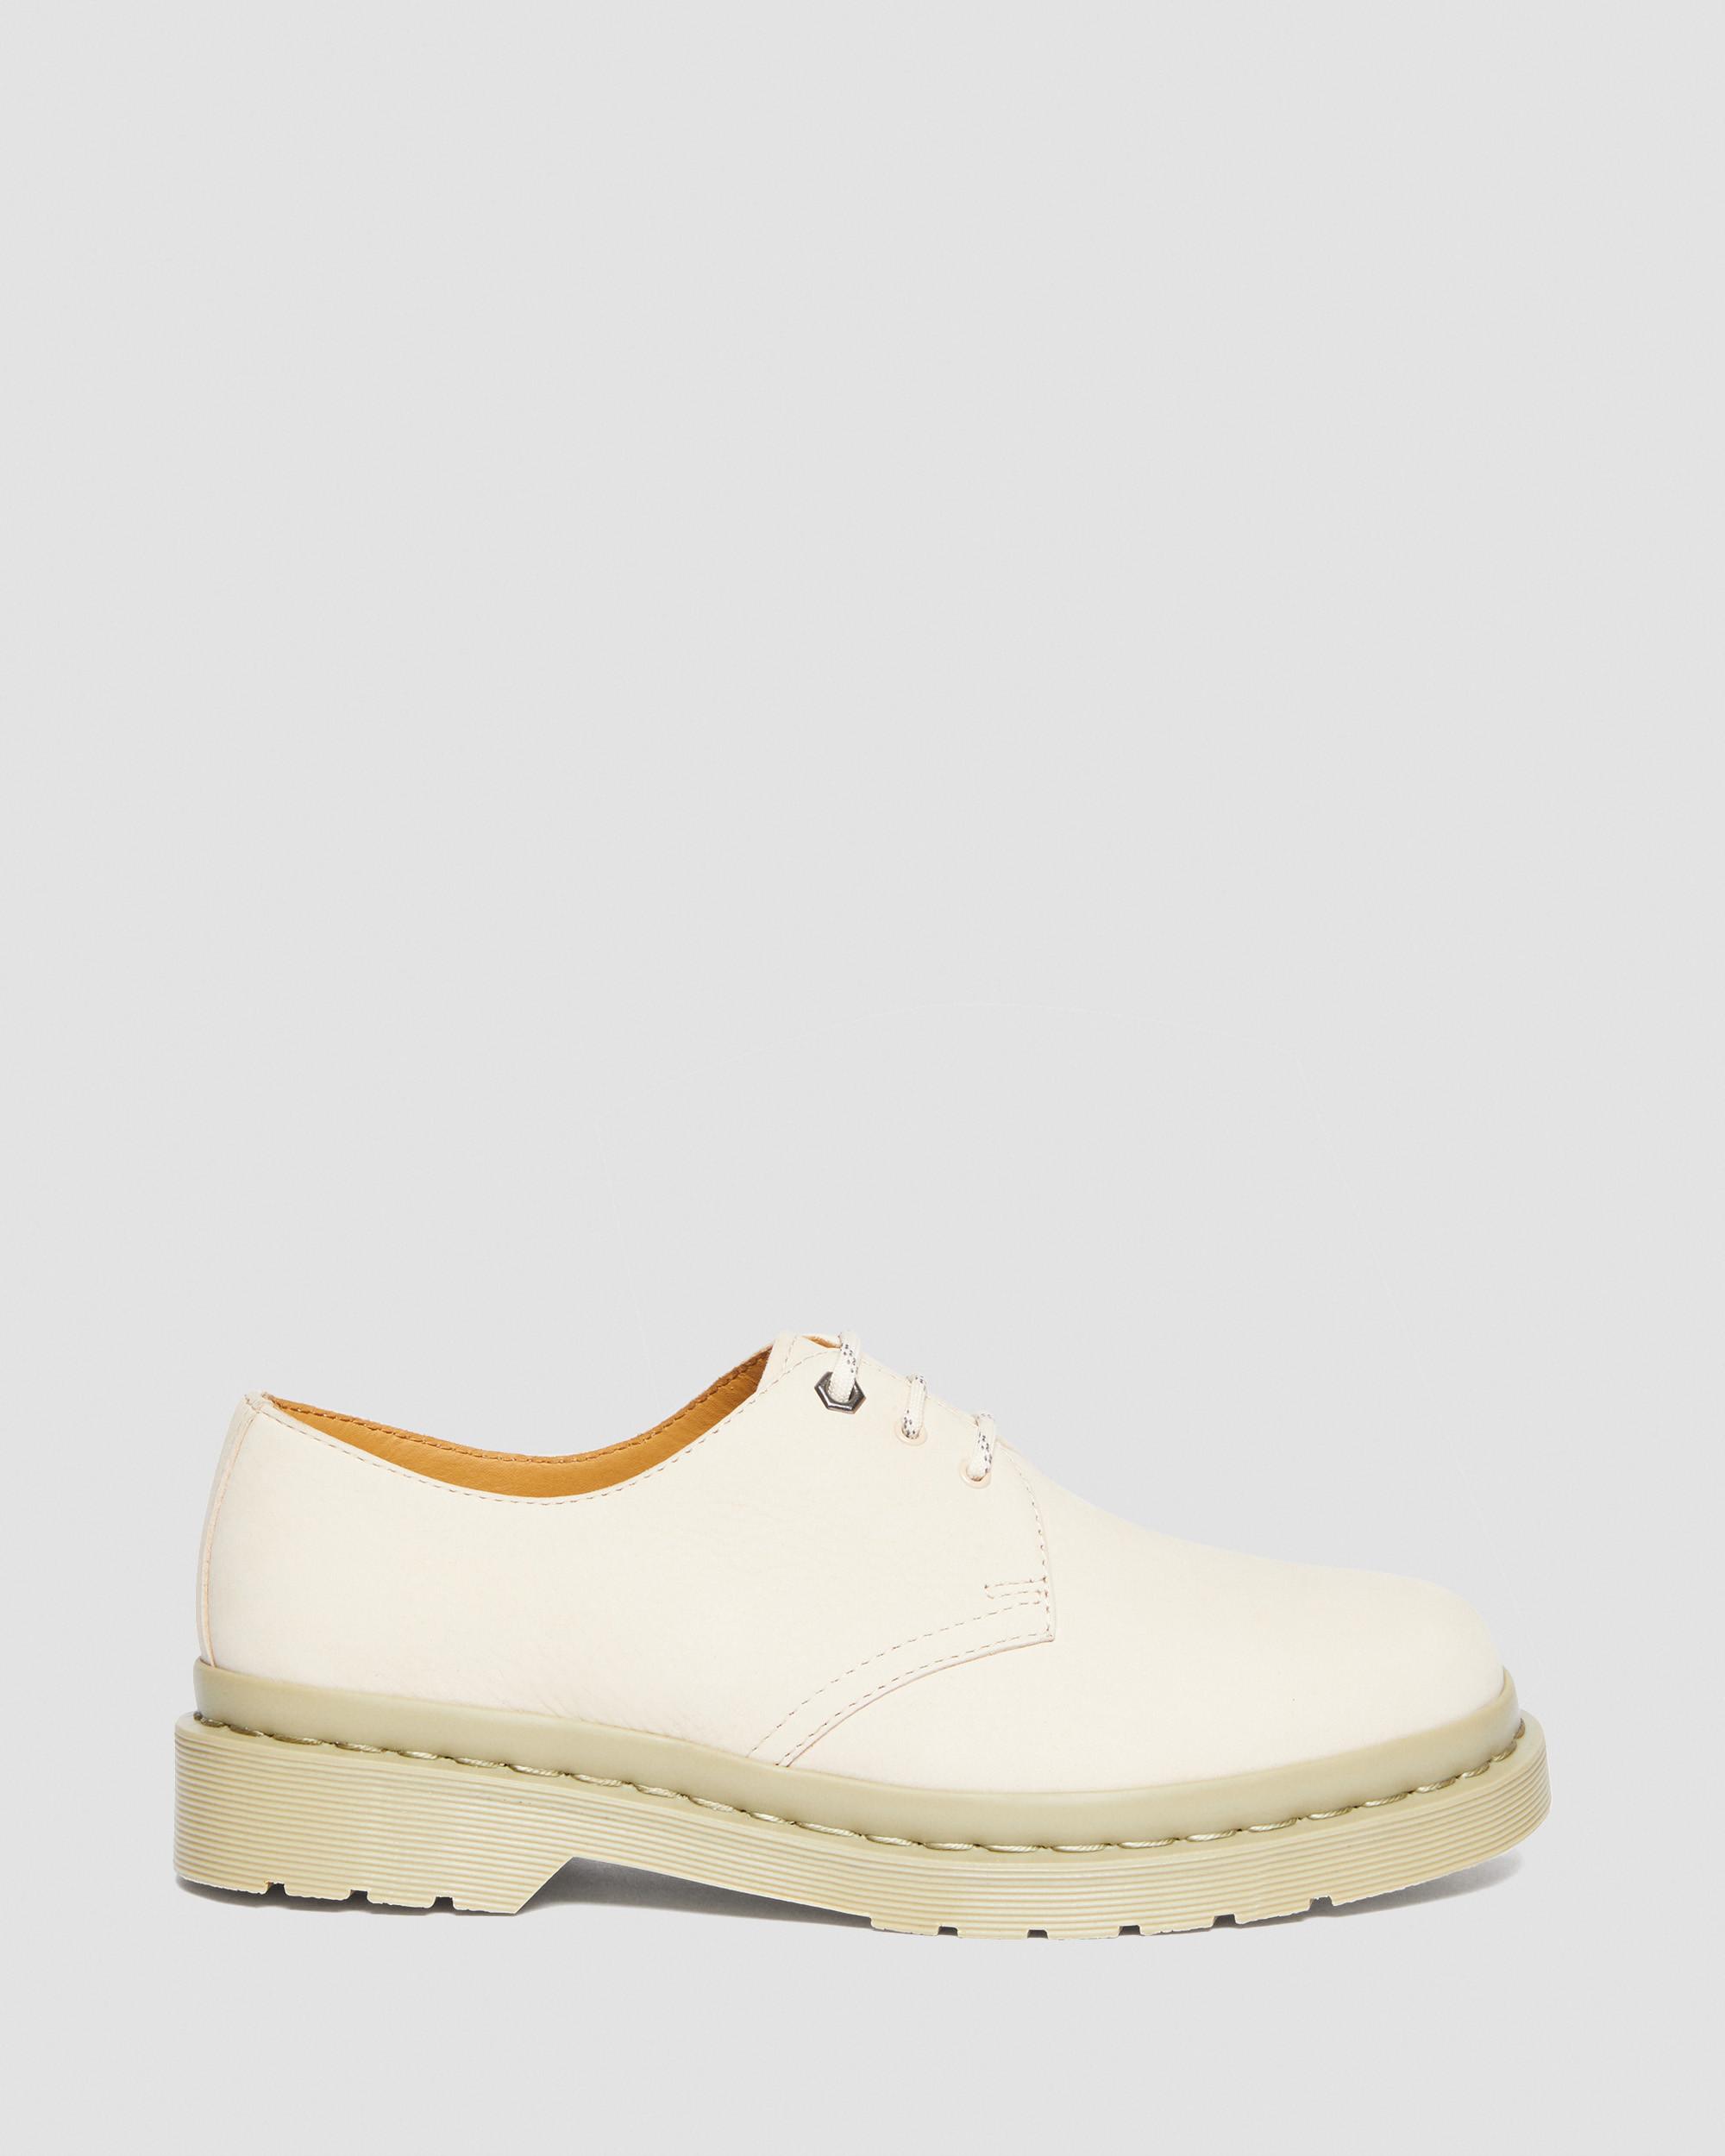 1461 Mono Milled Nubuck Leather Oxford Shoes in Parchment Beige | Dr.  Martens